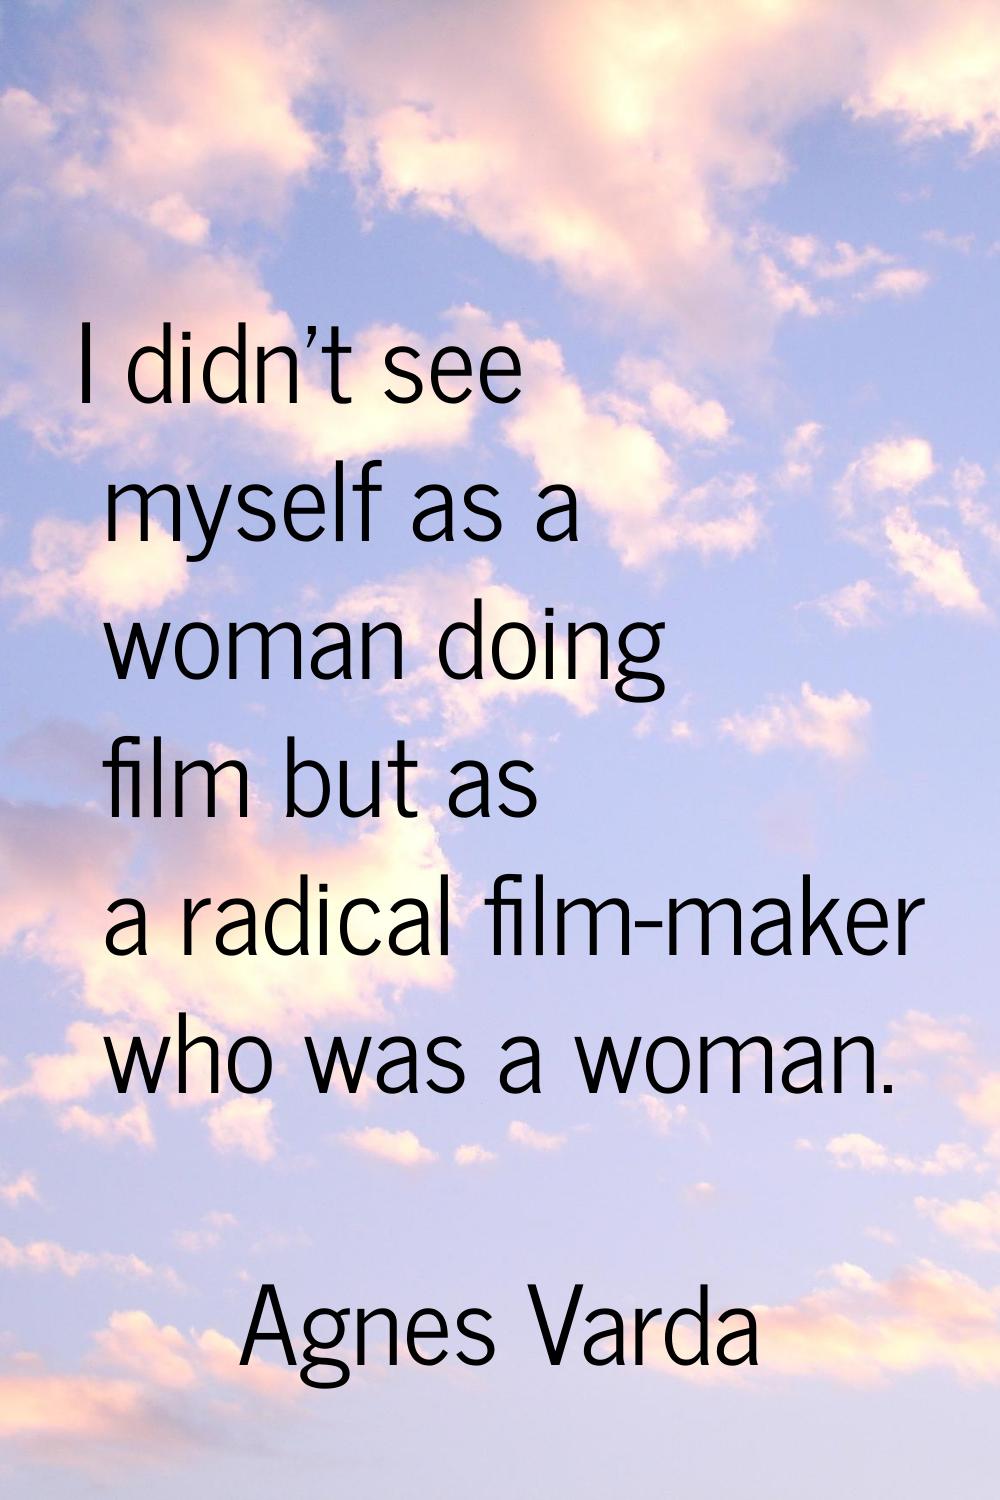 I didn't see myself as a woman doing film but as a radical film-maker who was a woman.